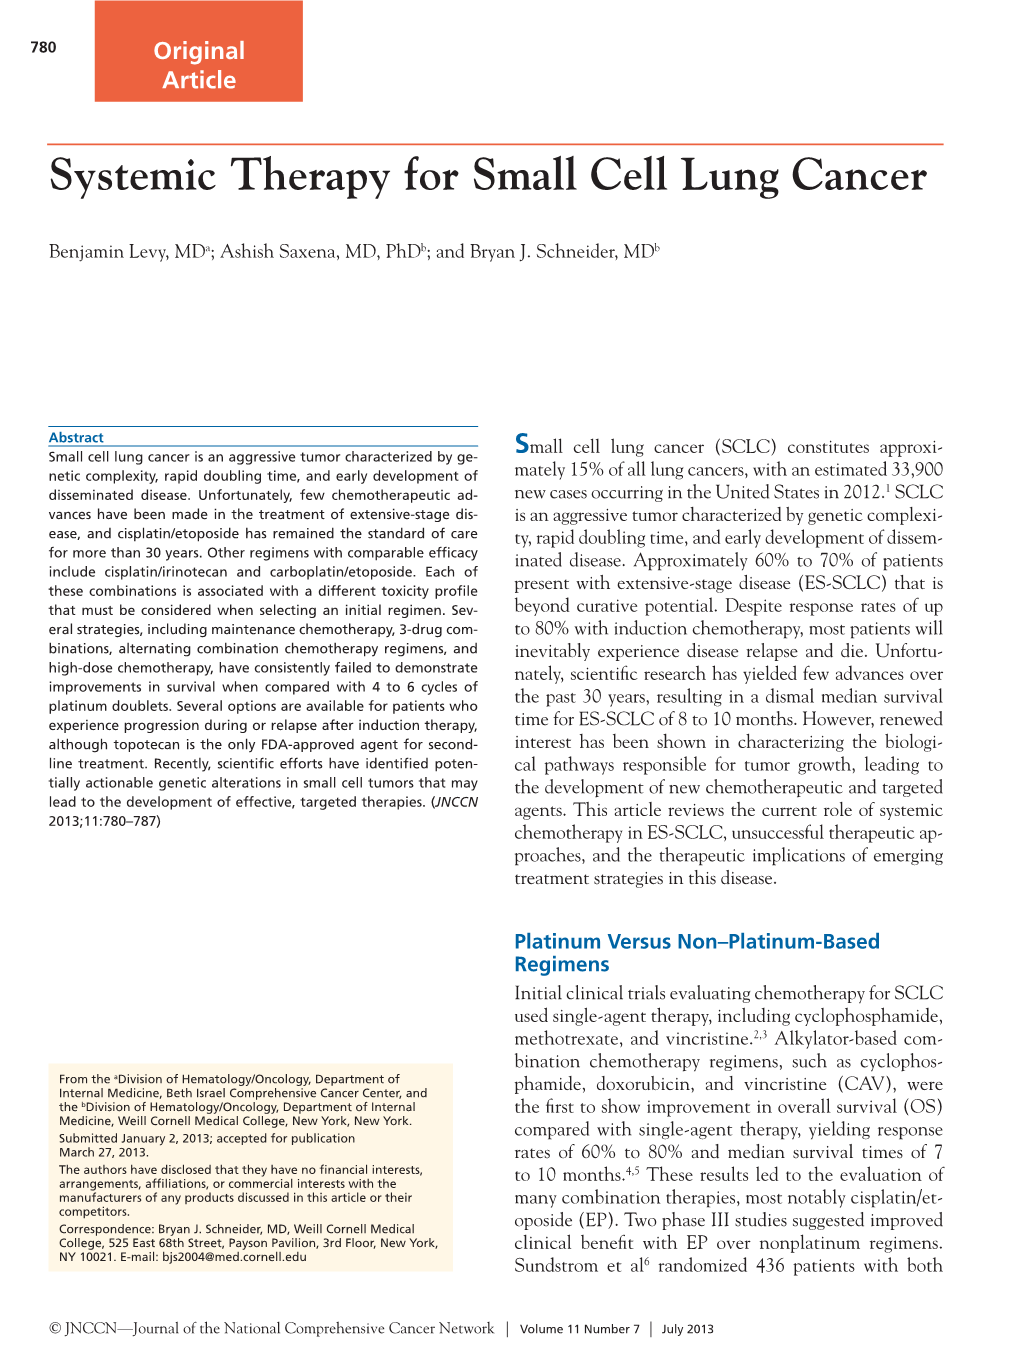 Systemic Therapy for Small Cell Lung Cancer